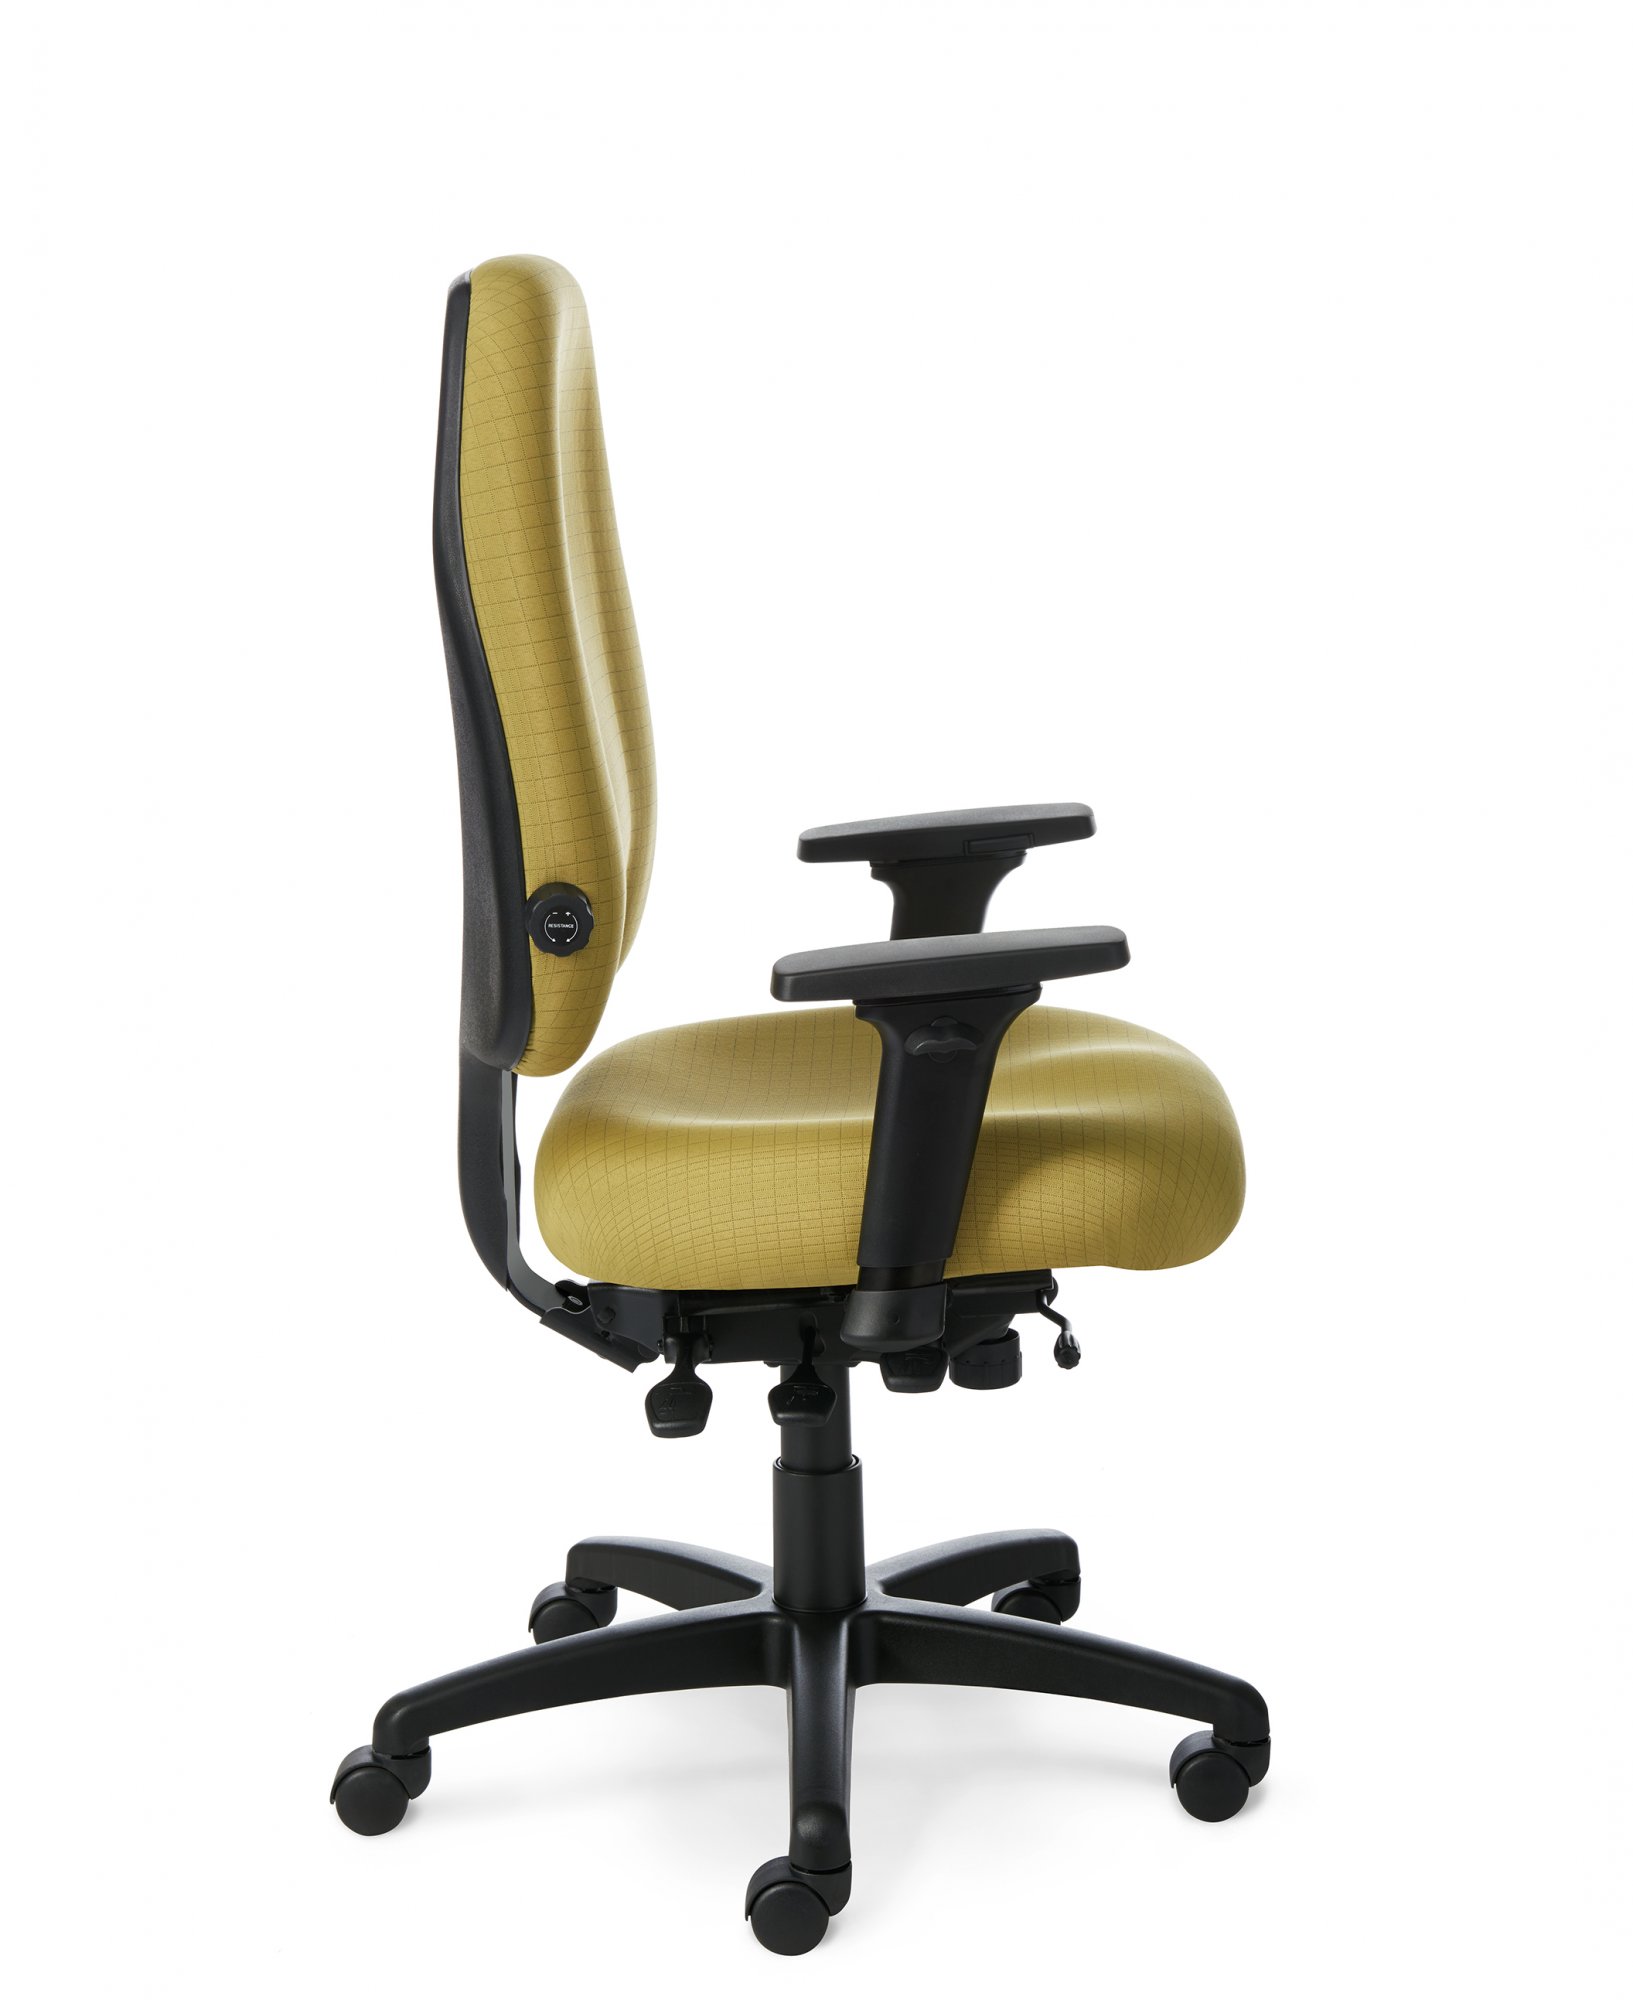 OM Seating 7878 Paramount Large Build Multi Function Chair